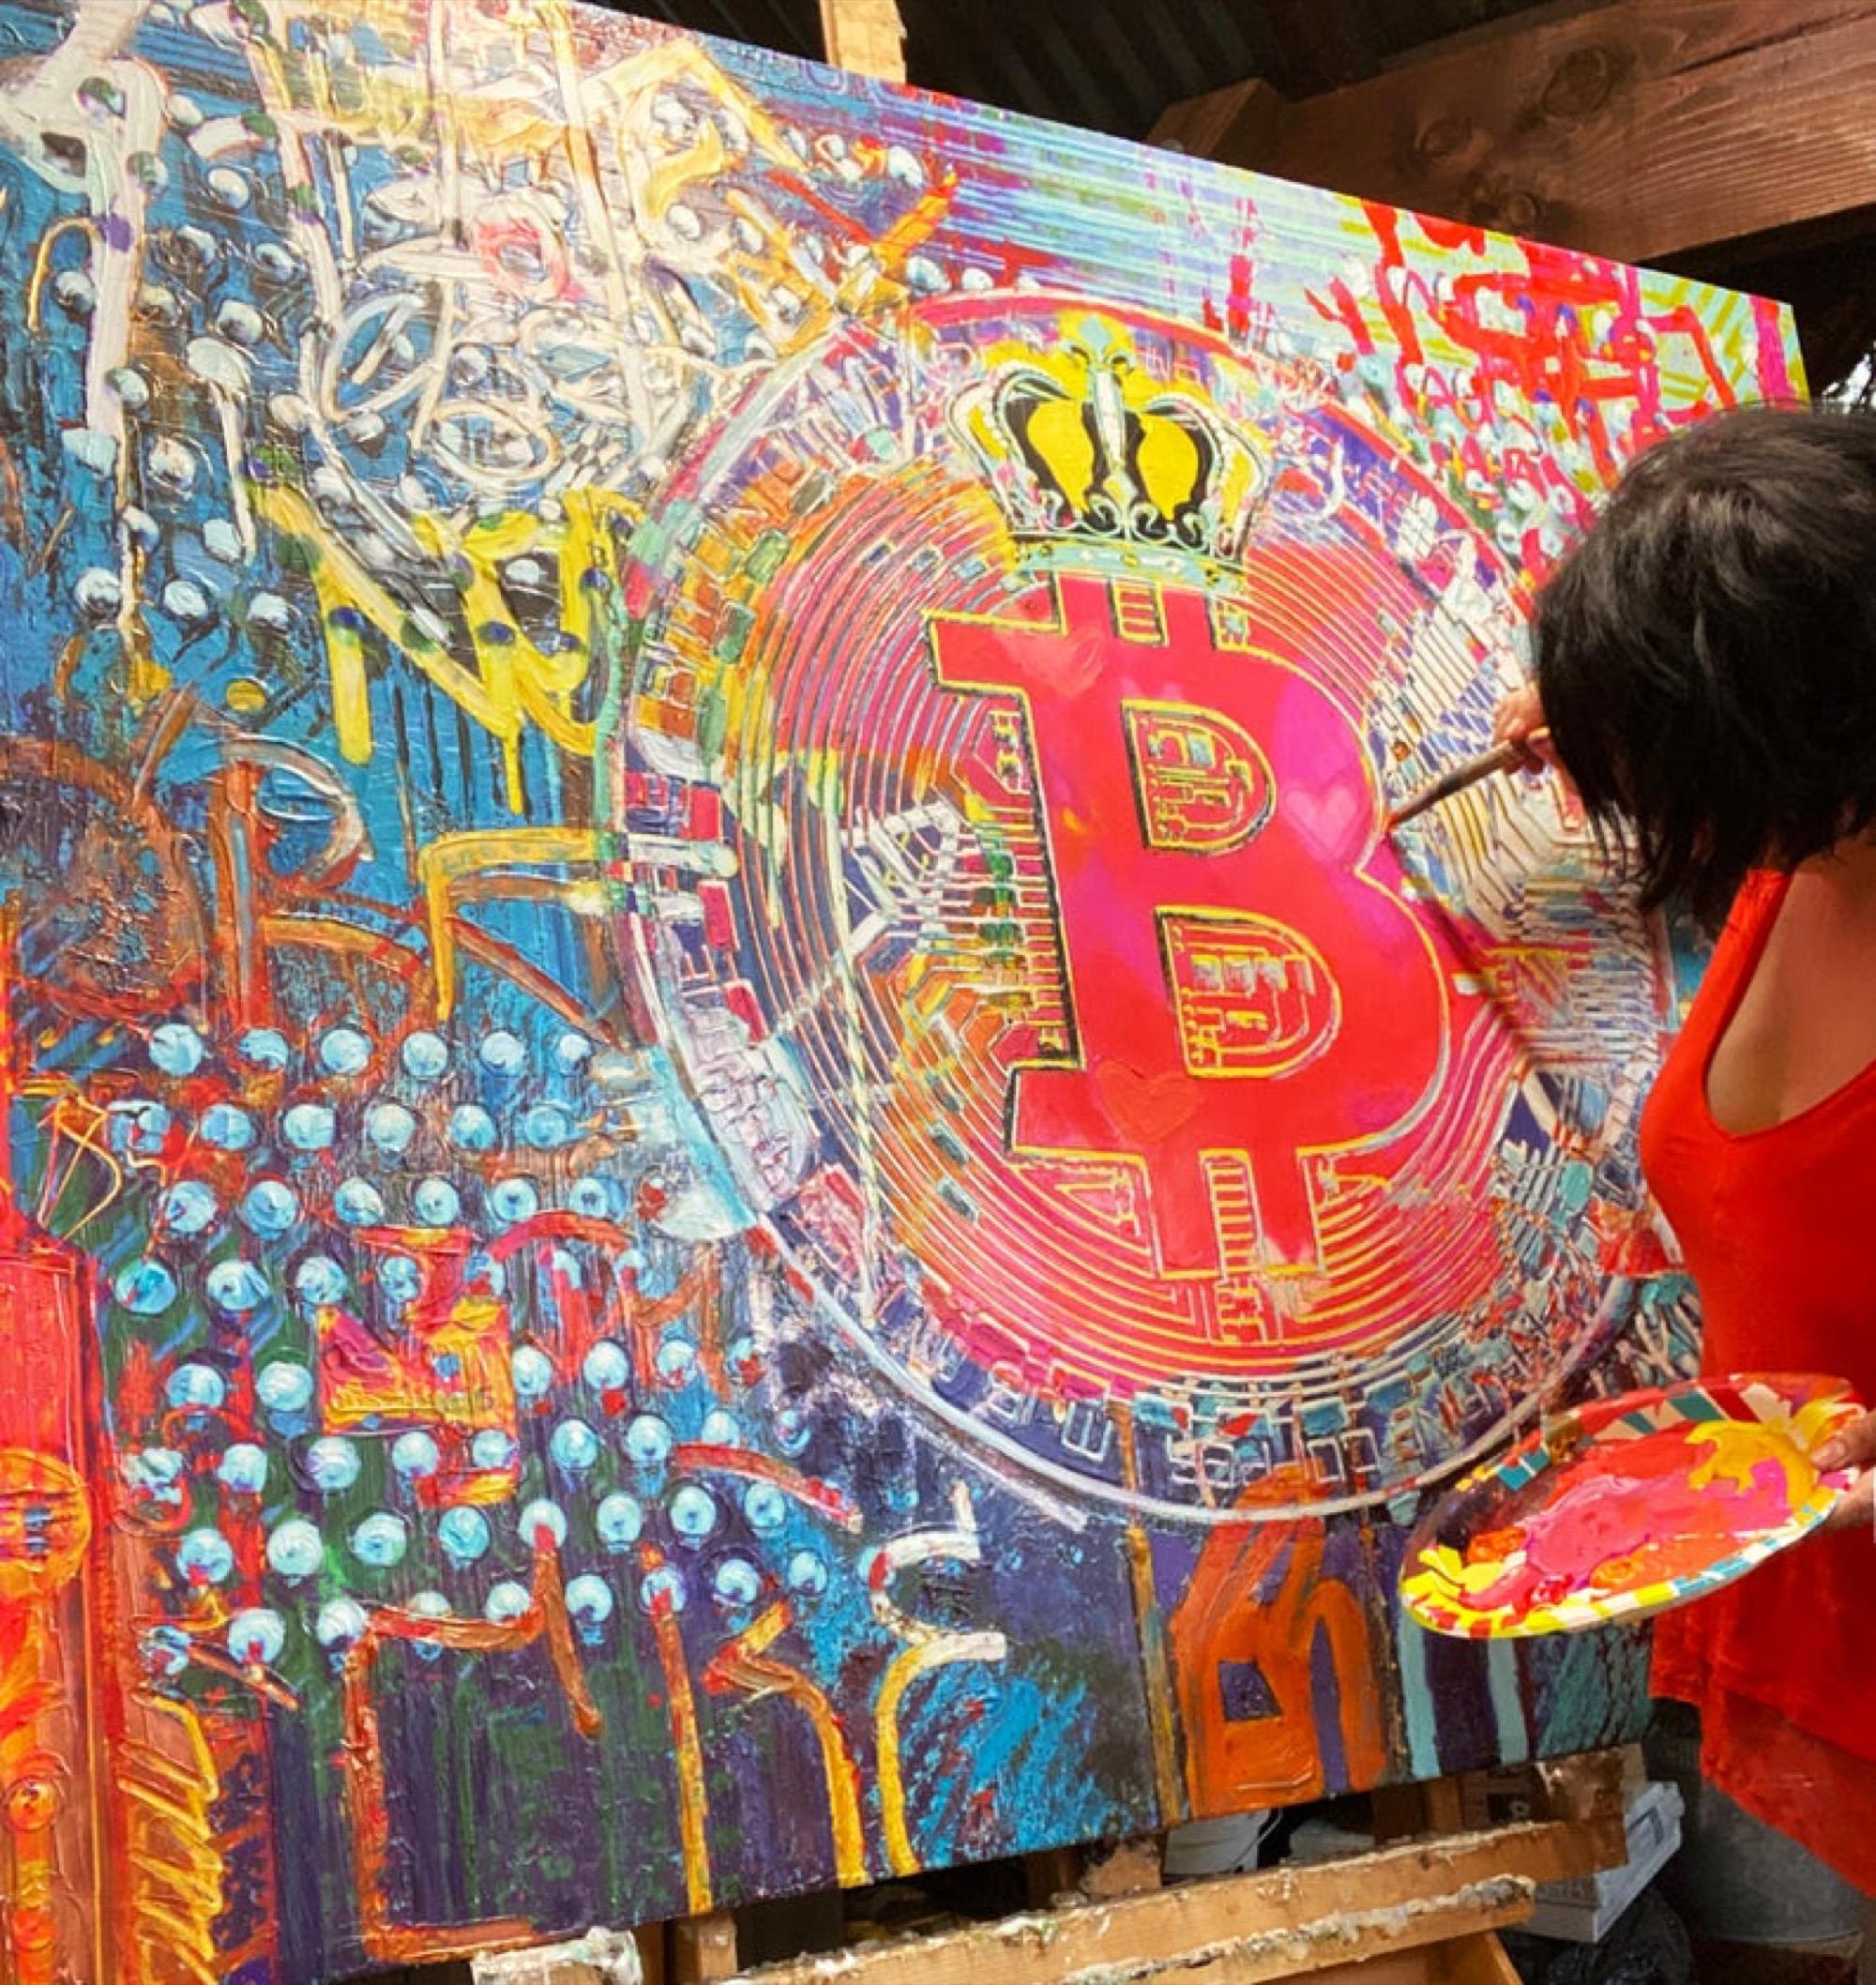 Bitcoin Graffiti Abstract Canvas Art, Cryptocurrency Bitcoin Painting H45